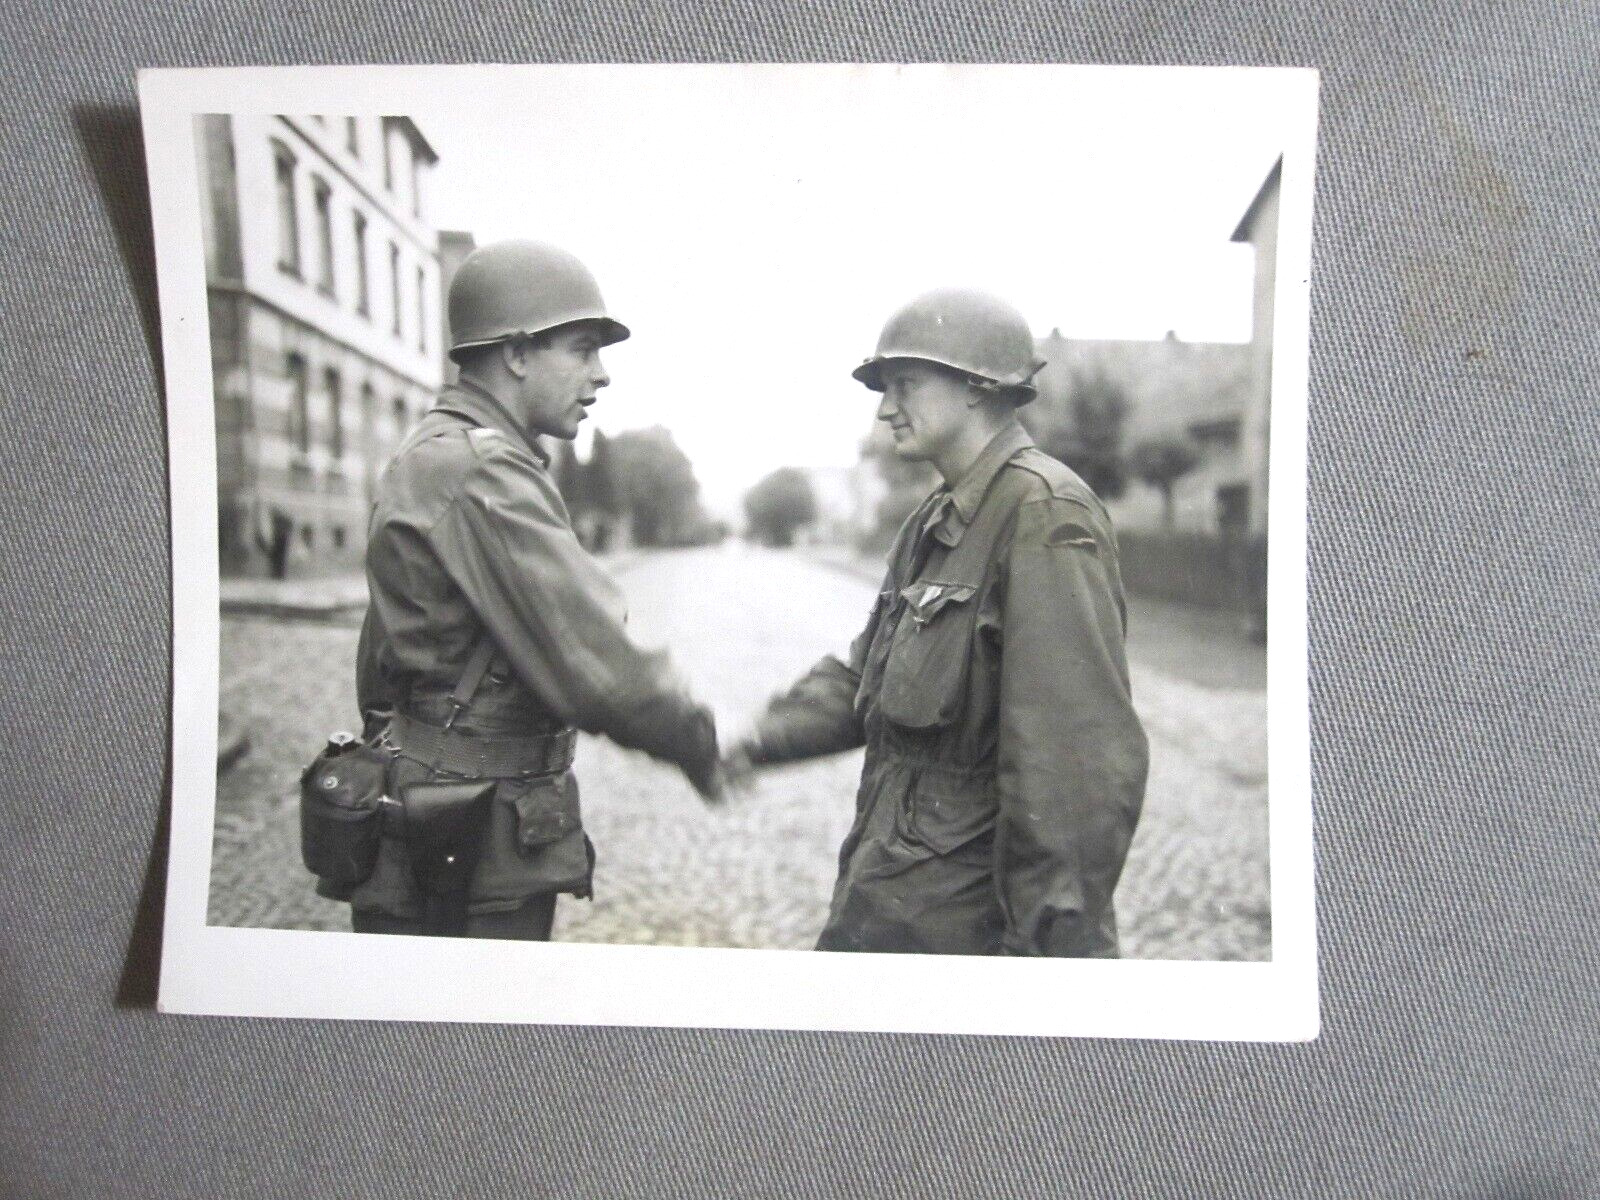 1945 - S/SGT. WALTER WILLIAMS - 78th Div - Received Bronze Star - Photo